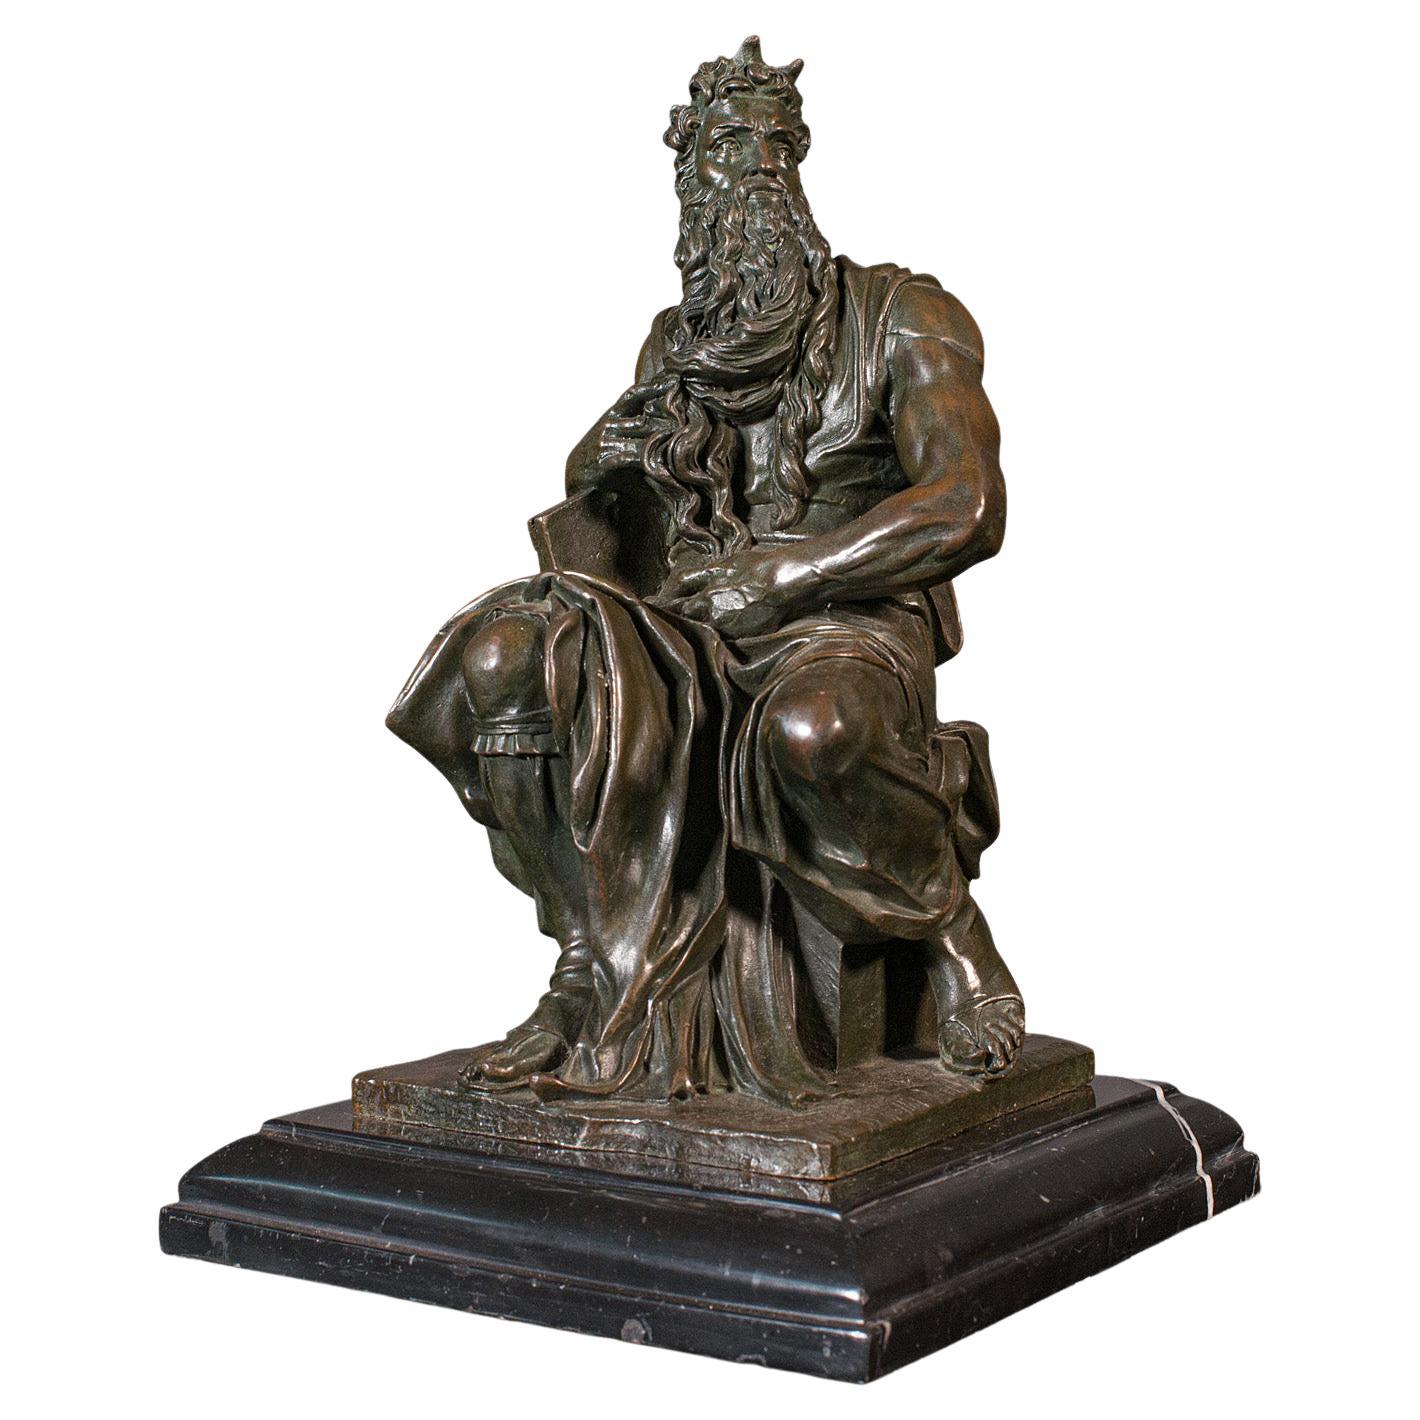 Vintage Decorative Figure of Moses, English, Bronze, Statue, After Michelangelo For Sale